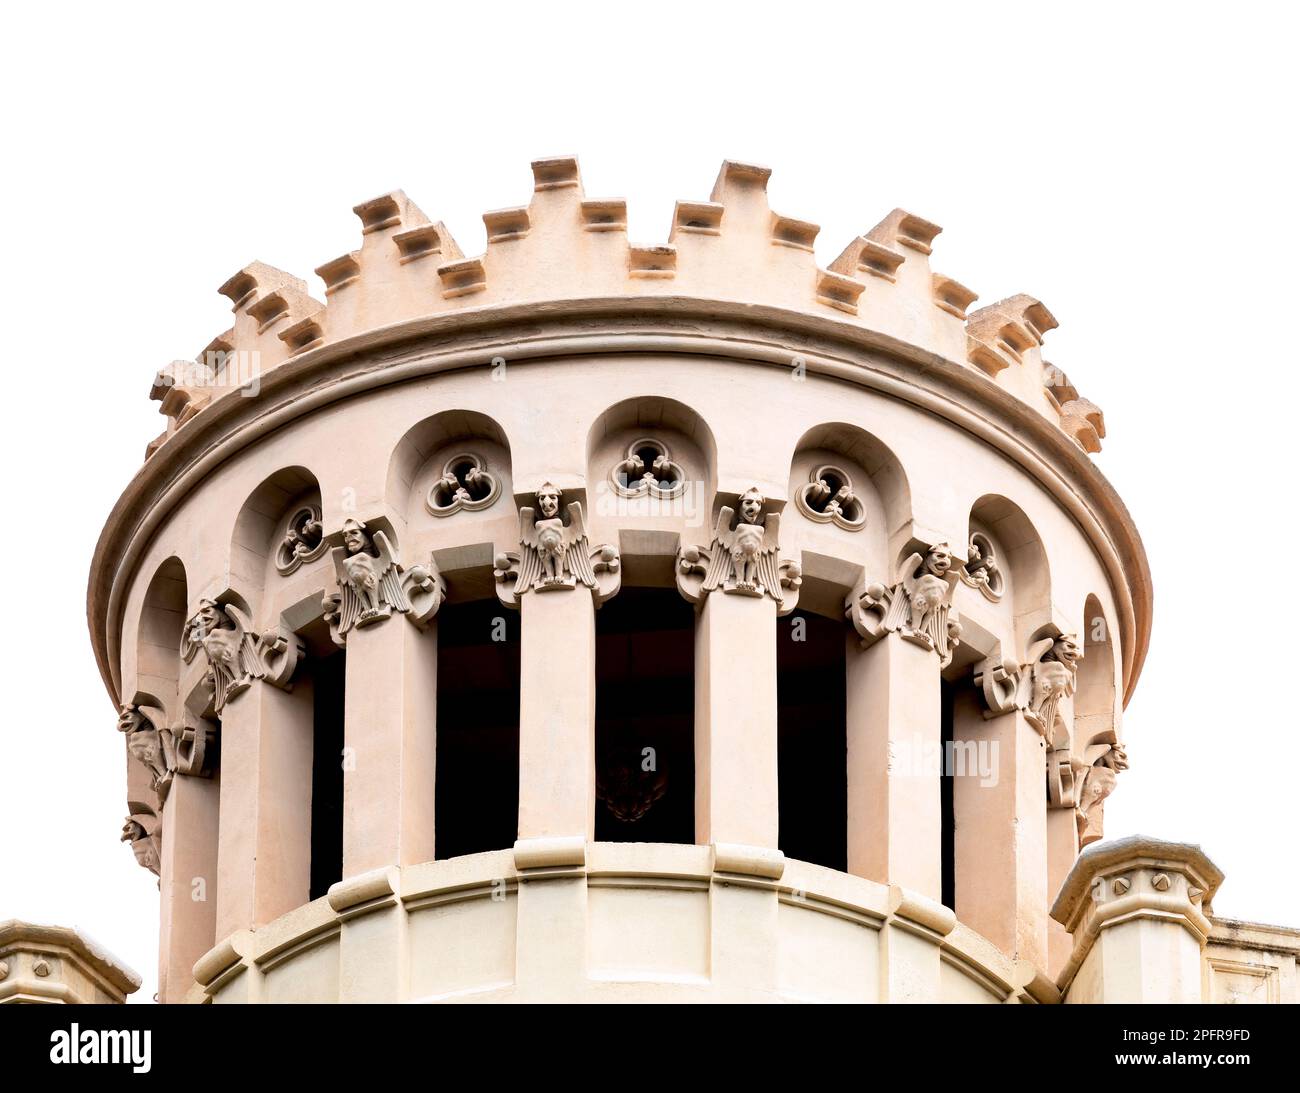 Shot in black and white and color detail on the facade of this historic building representing some character, animal or flower. Set at Barcelona Stock Photo